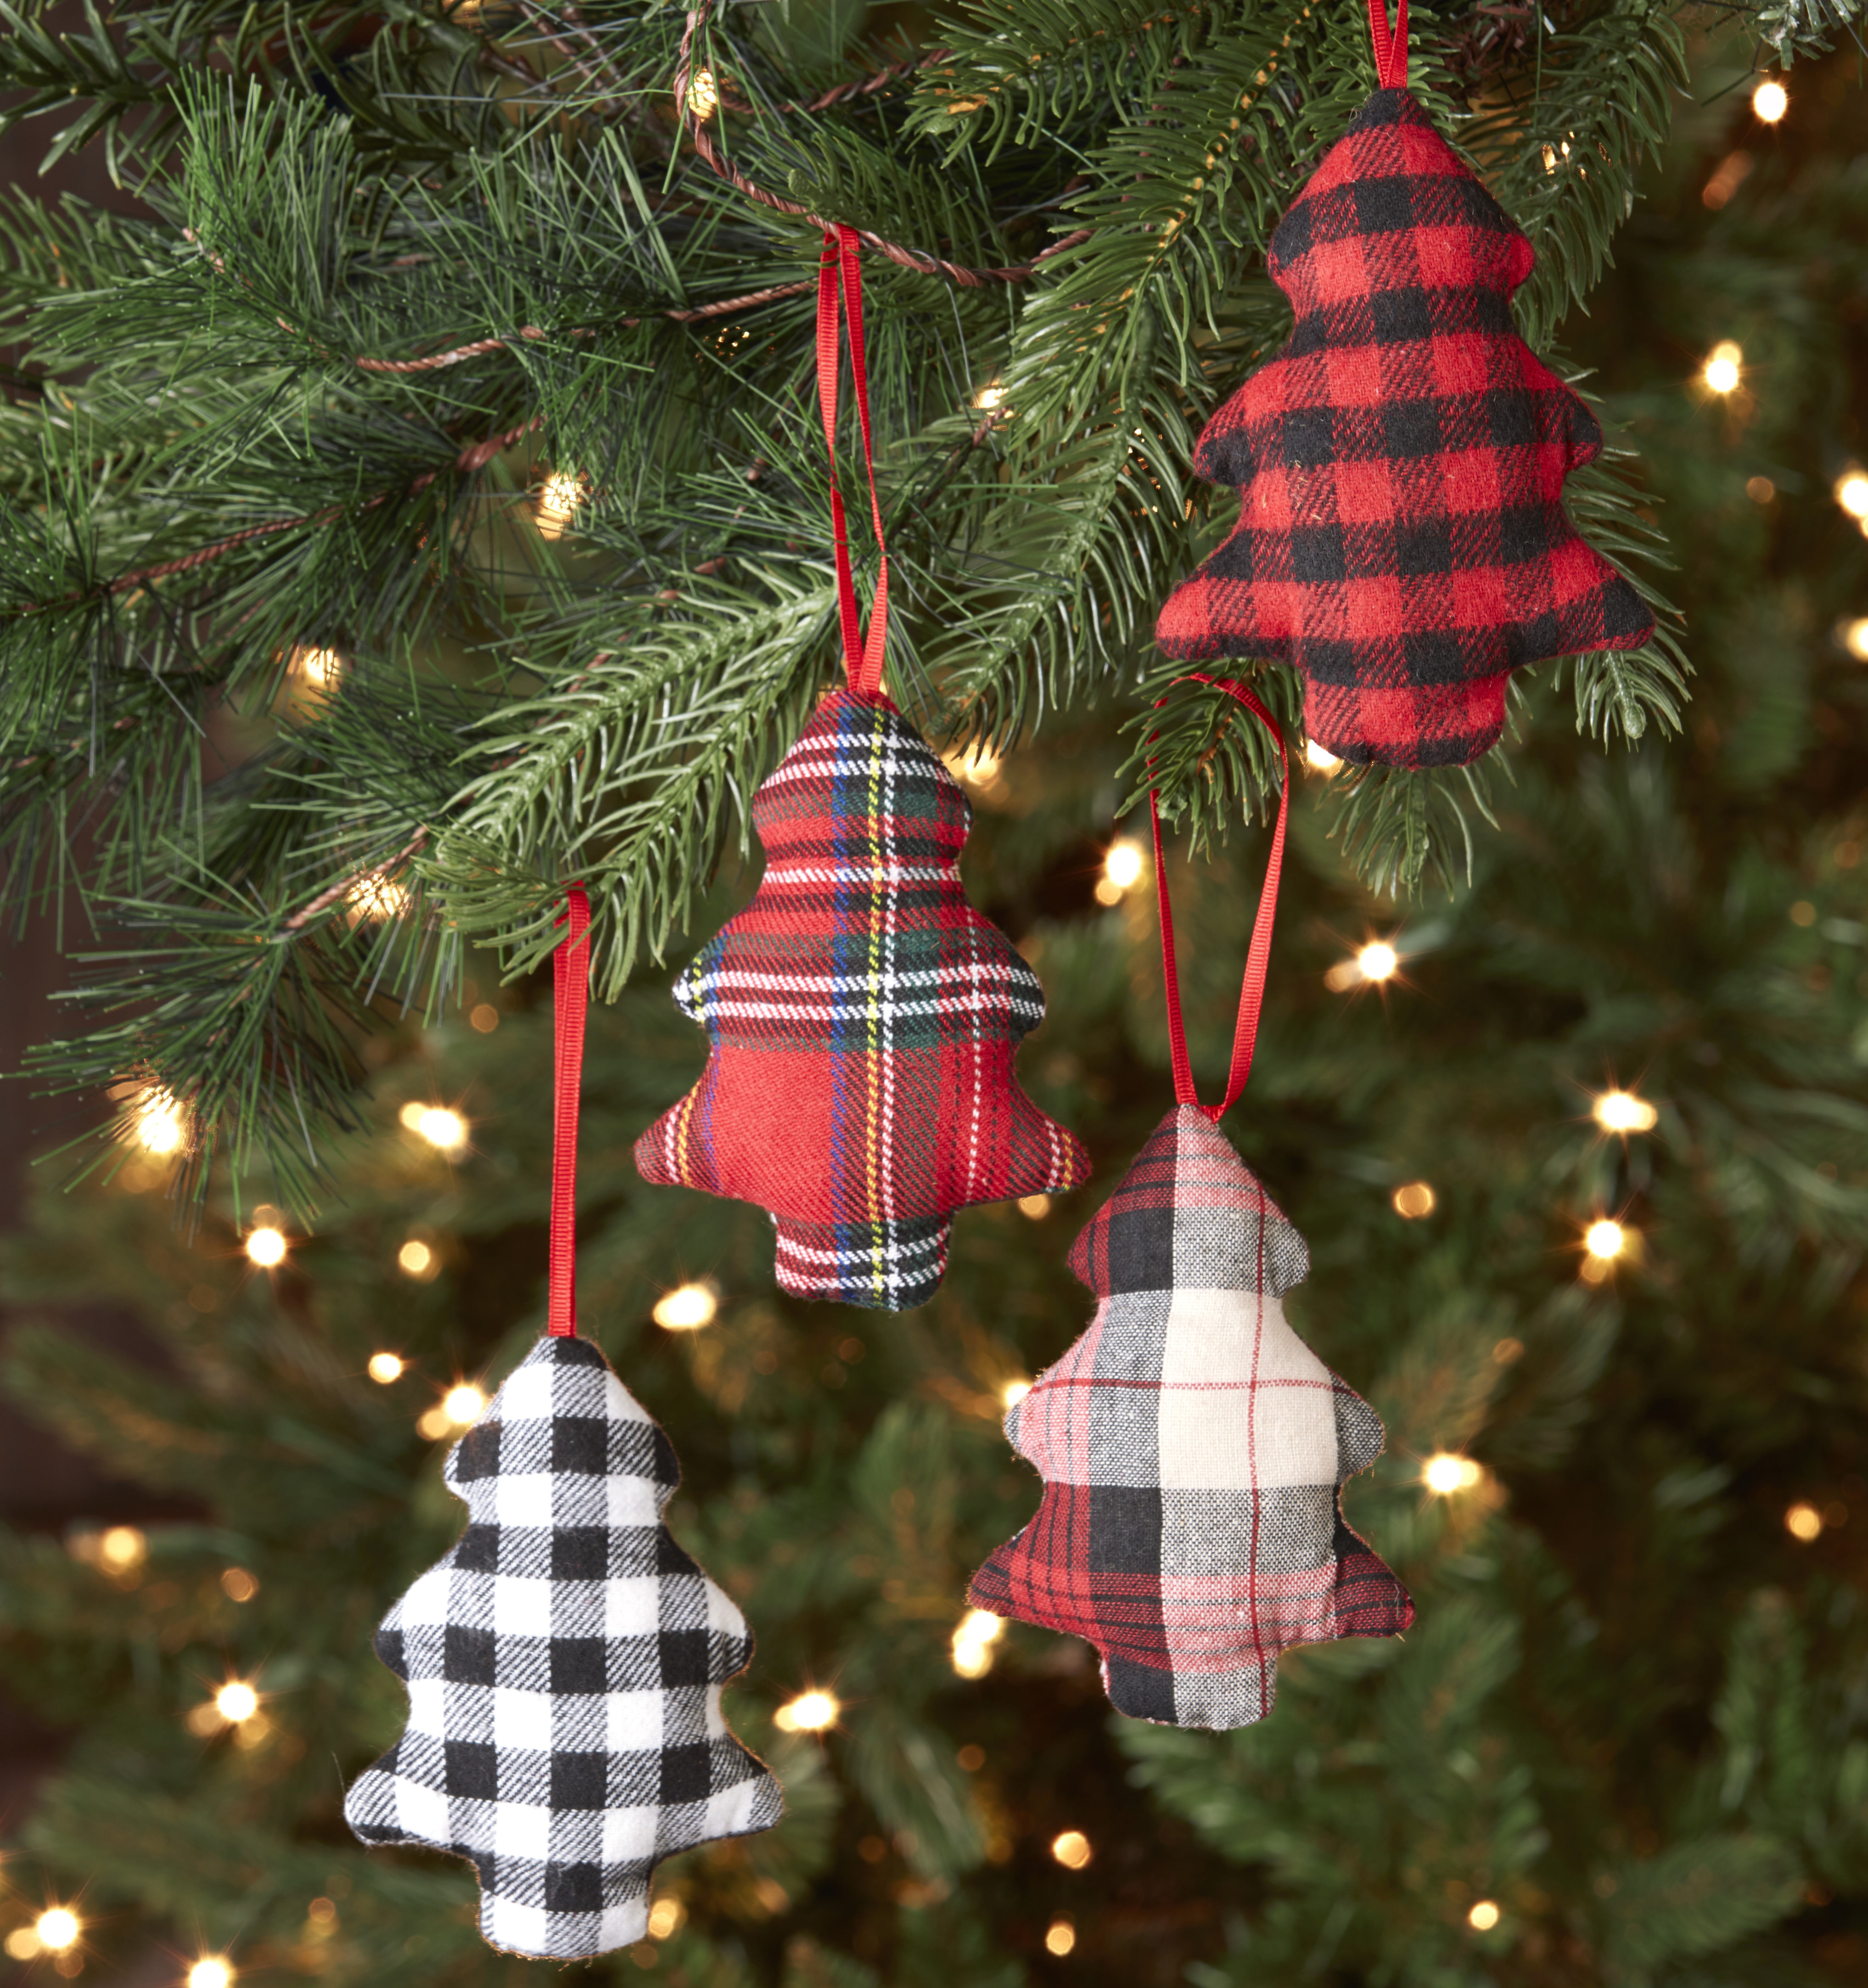 Hand Crafted Red Buffalo Check Christmas Tree Ornament